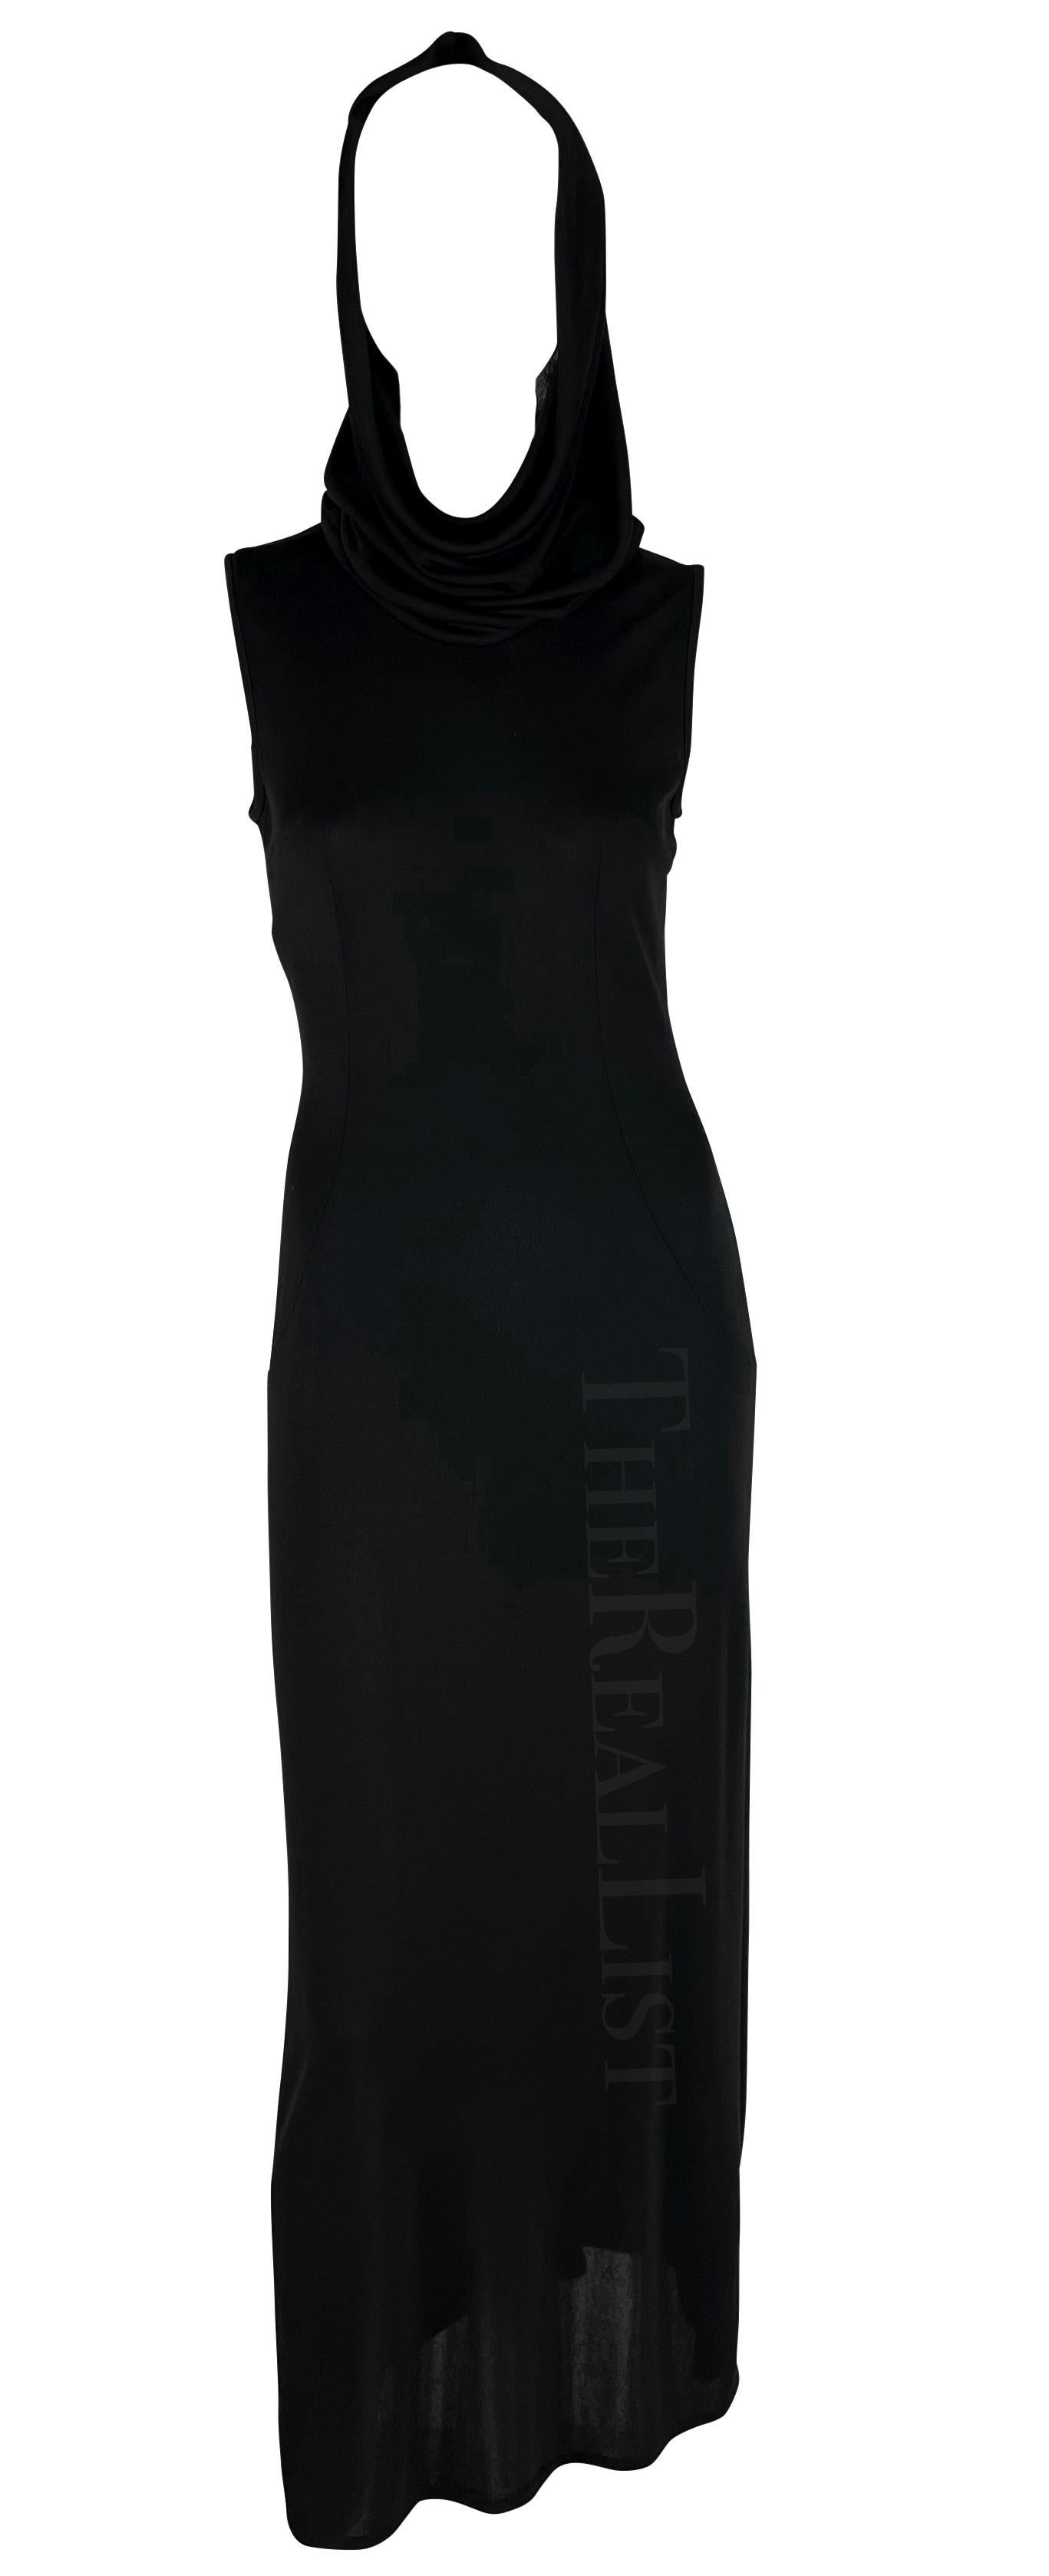 S/S 1996 Dolce & Gabbana Runway Hooded Stretch Black High Slit Dress In Excellent Condition For Sale In West Hollywood, CA